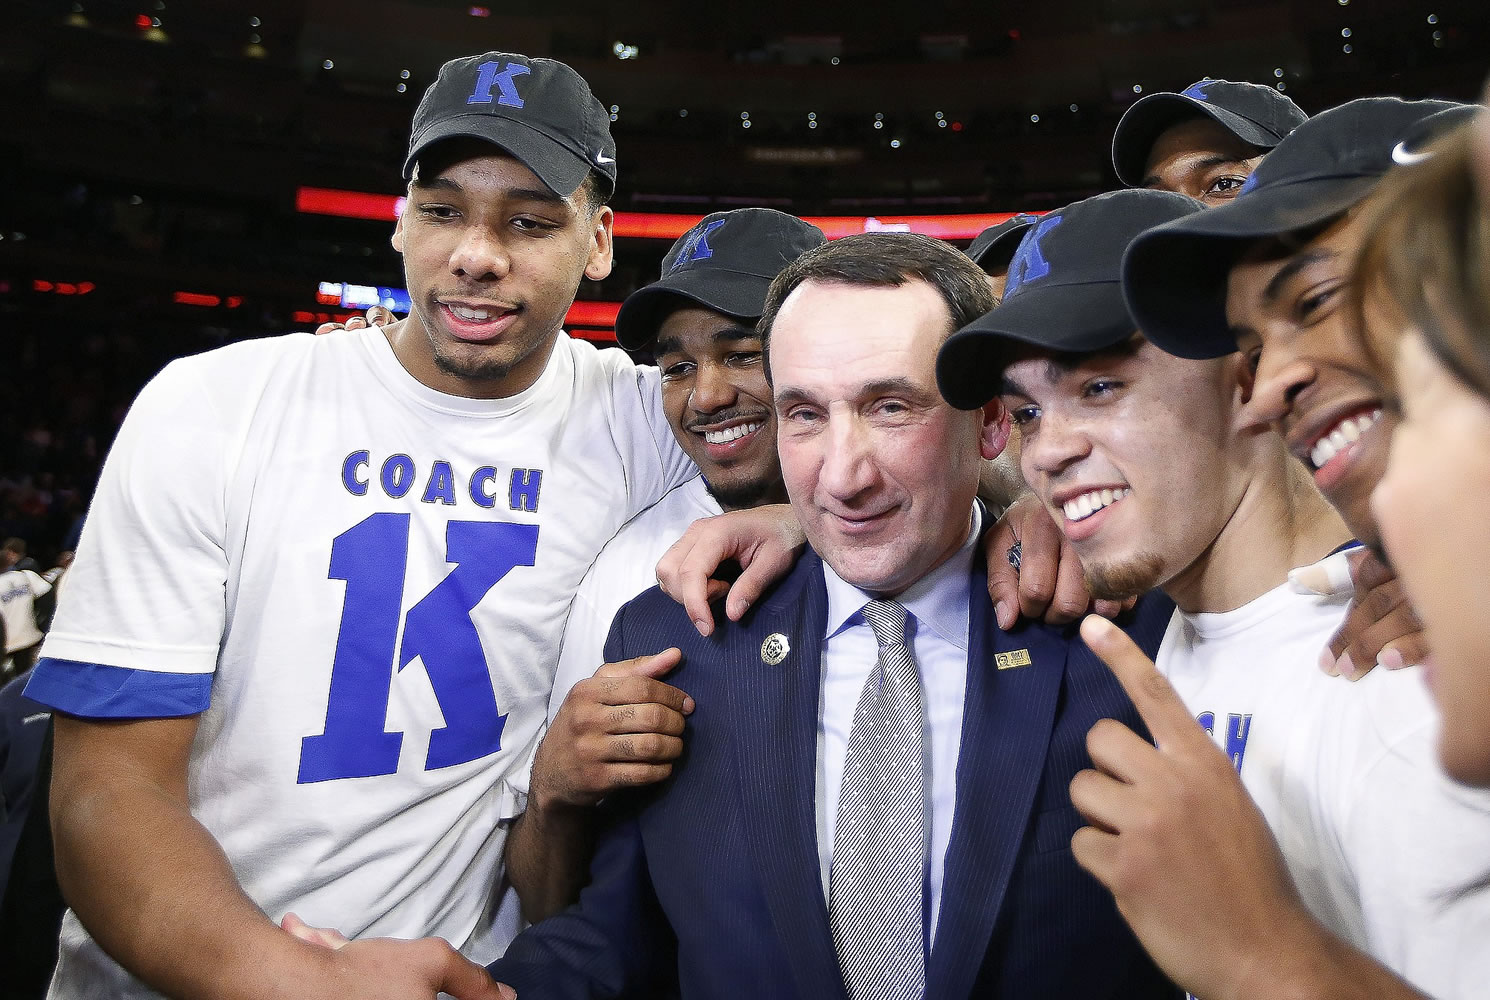 Duke head coach Mike Krzyzewski, center, celebrates with his players after his 1,000th career win in an NCAA college basketball game against St. John's at Madison Square Garden in New York, Sunday, Jan. 25, 2015. Krzyzewski became the first men's coach in Division I history with 1,000 wins.